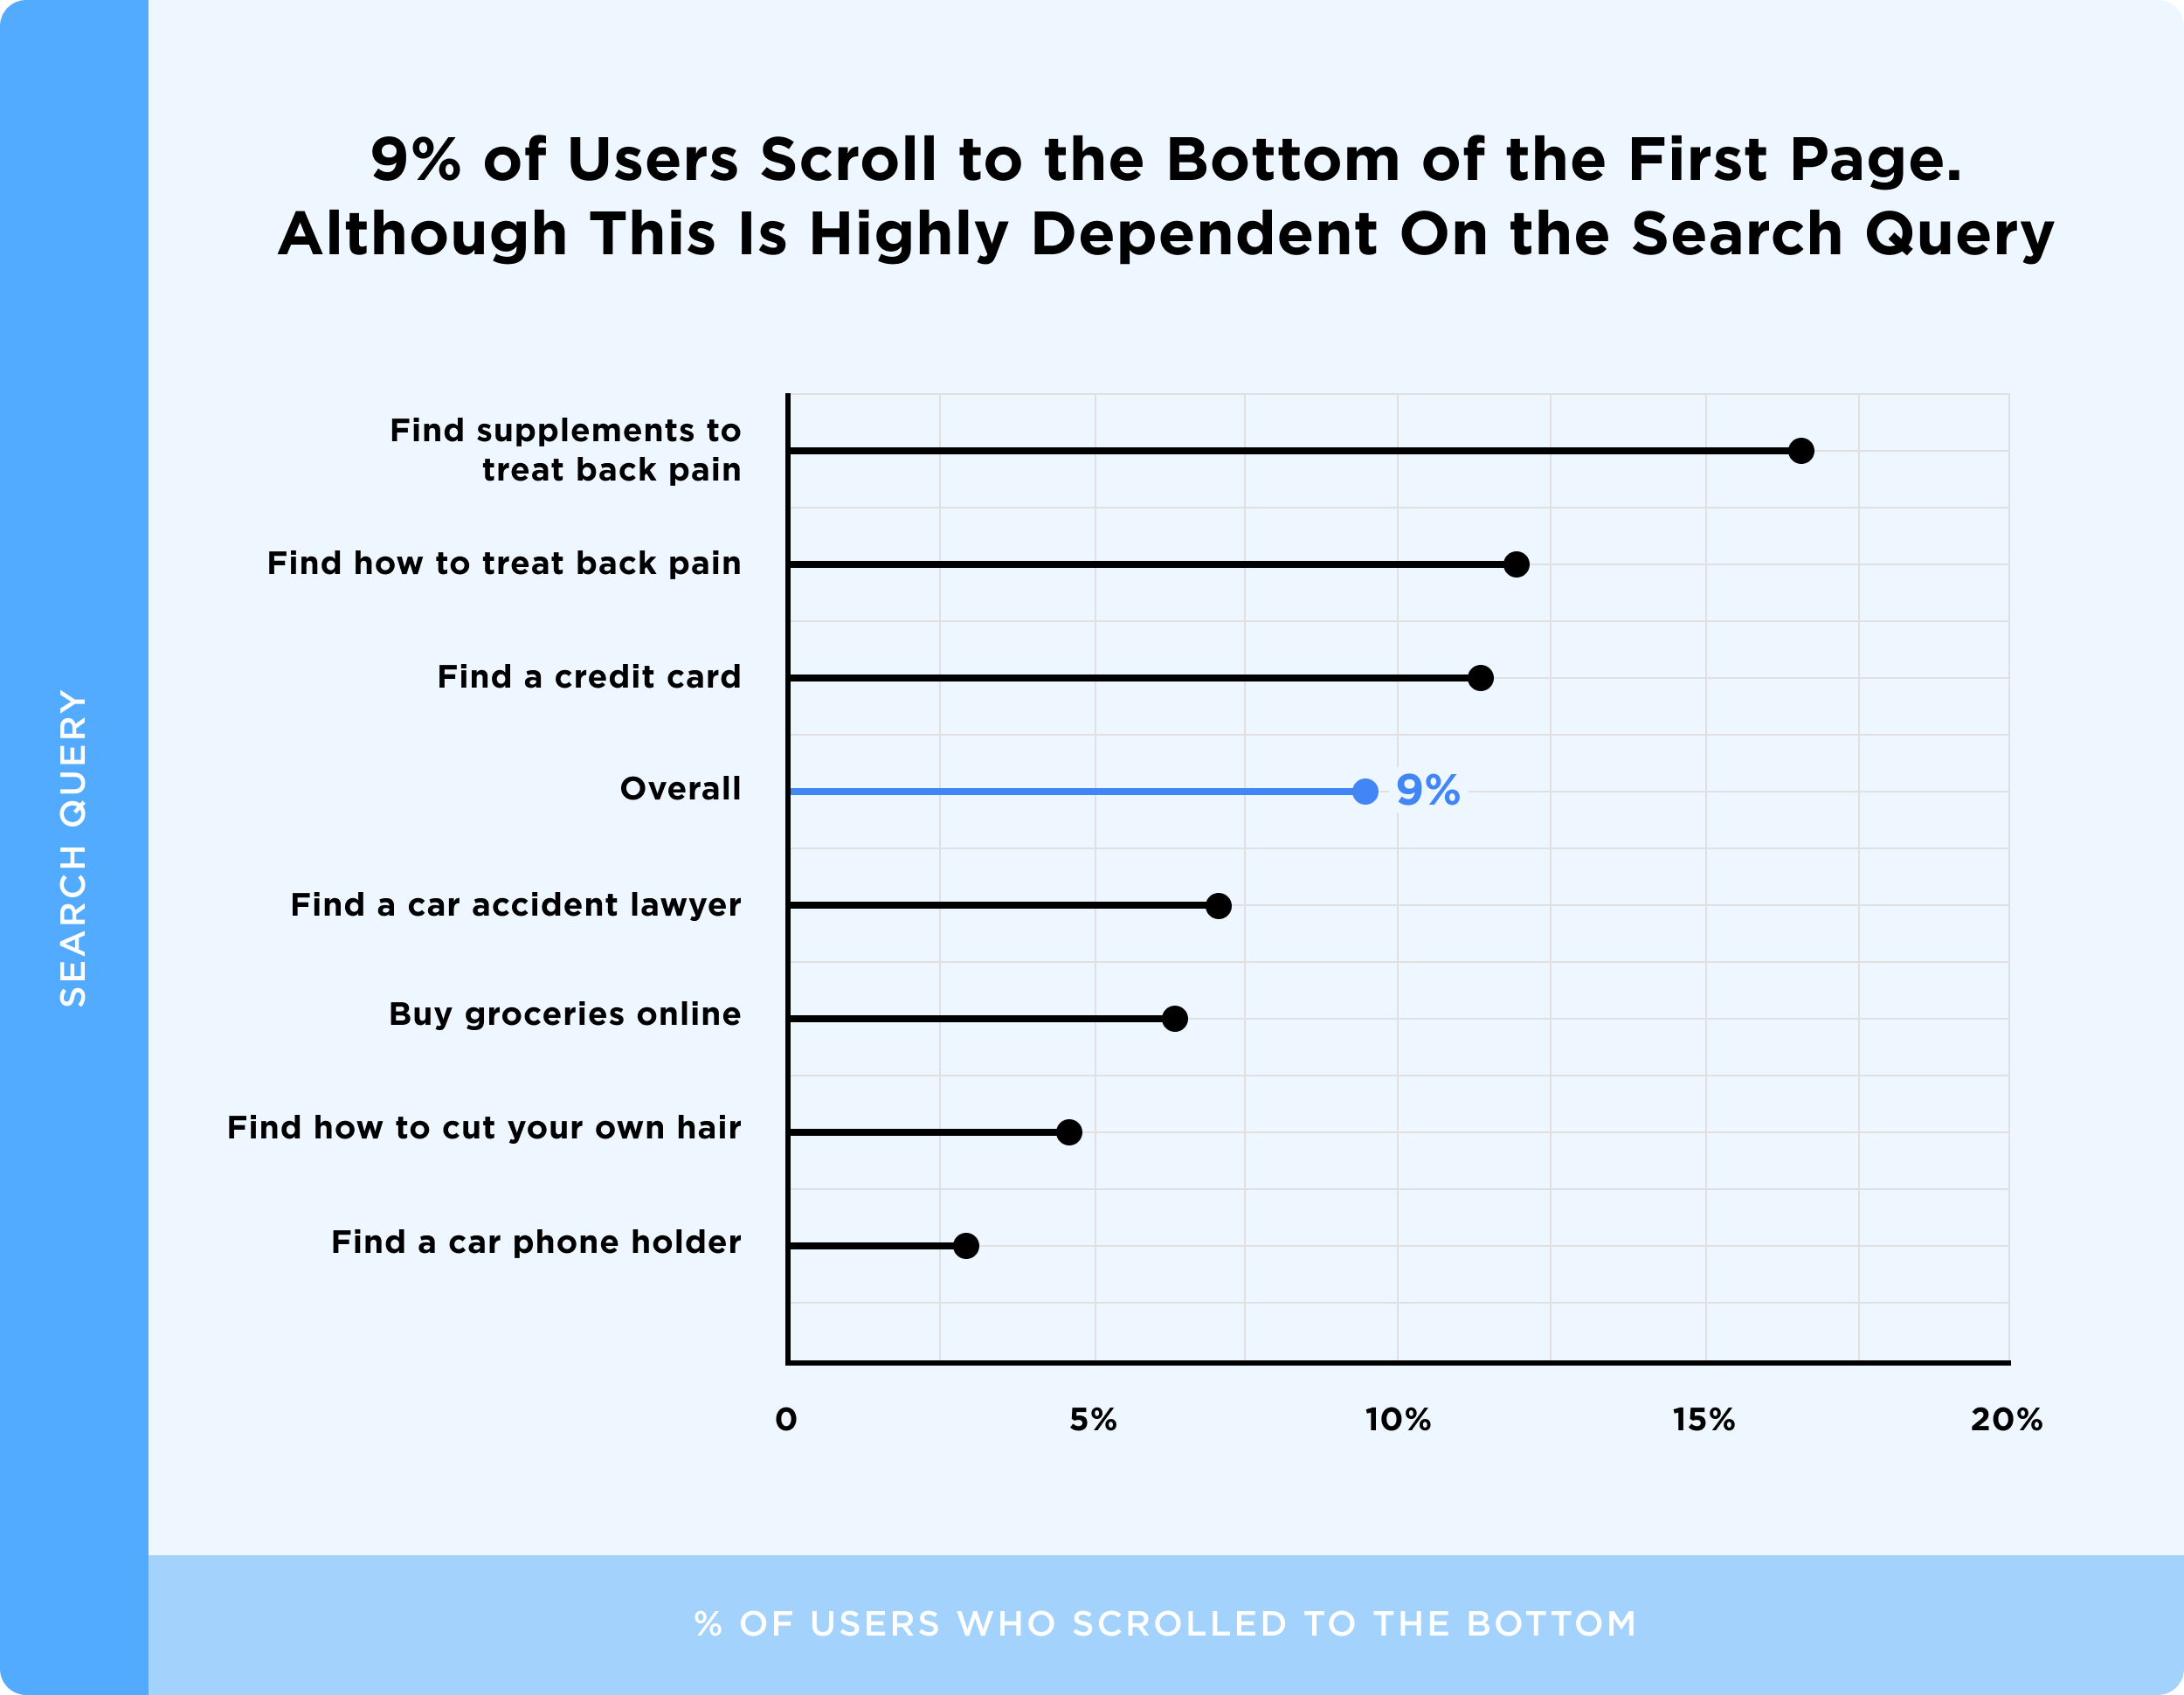 9% of Users Scroll to the Bottom of the First Page